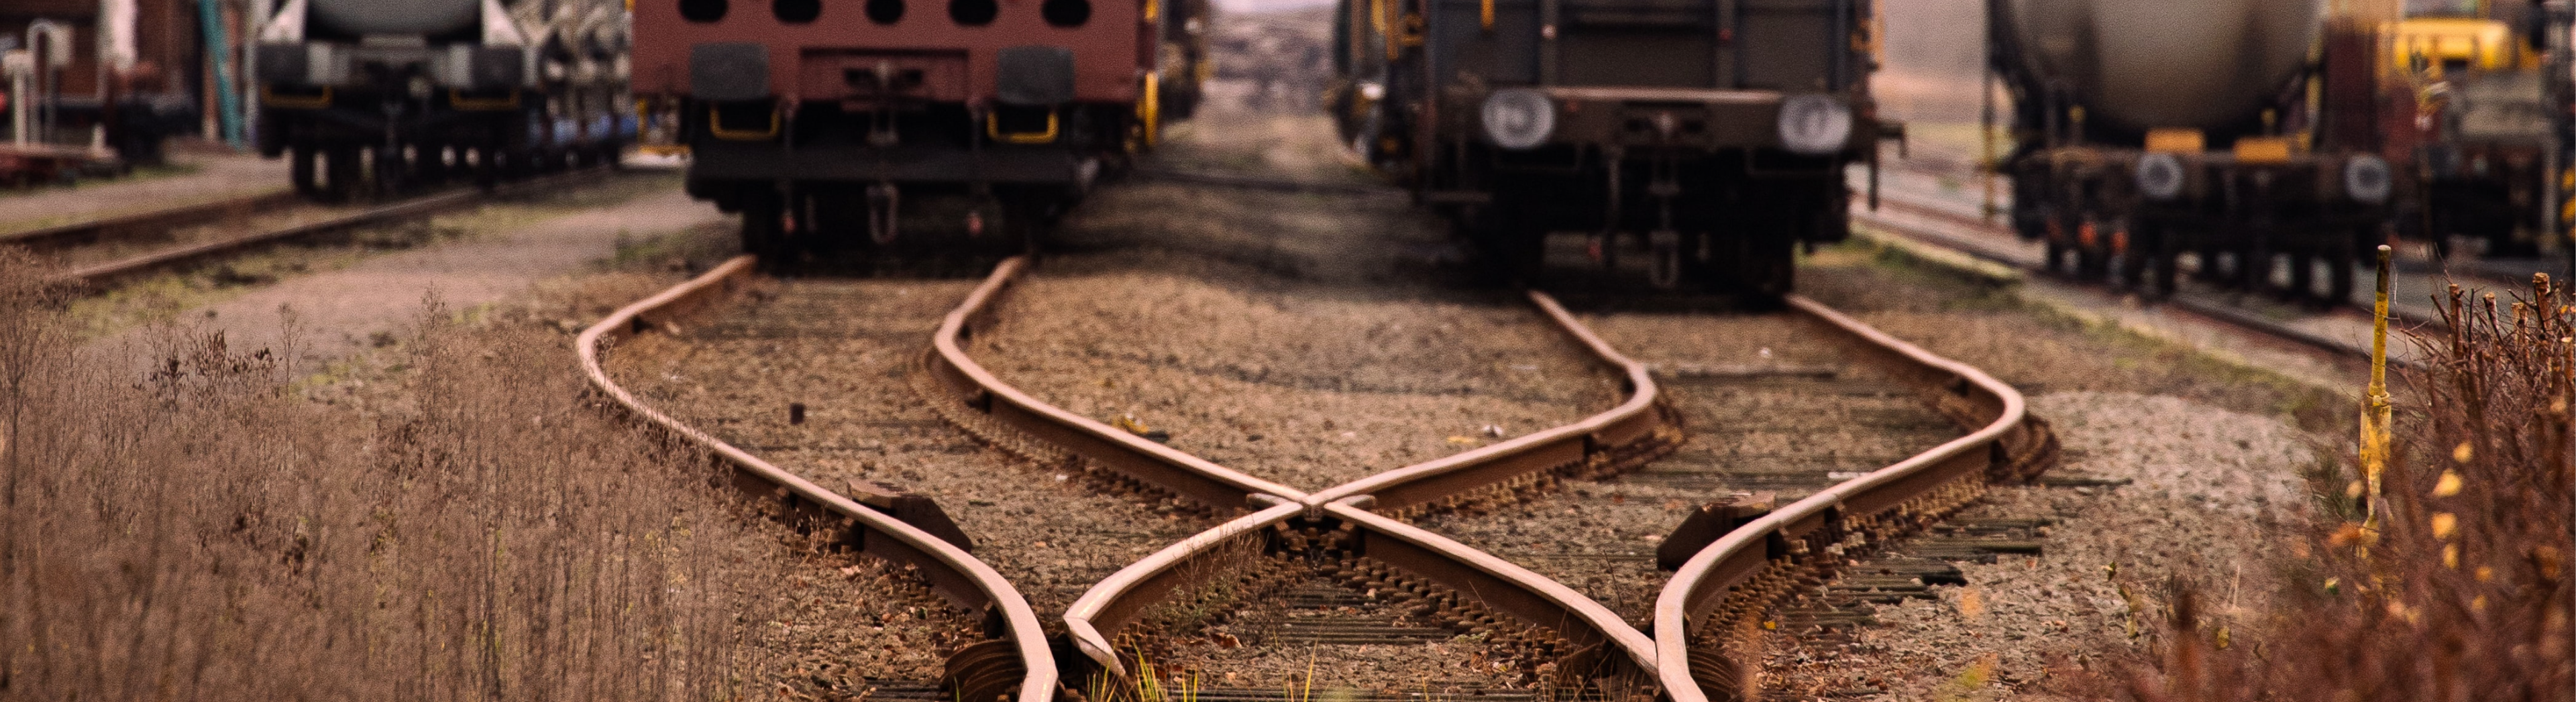 A photograph of a train track that diverges into two separate paths